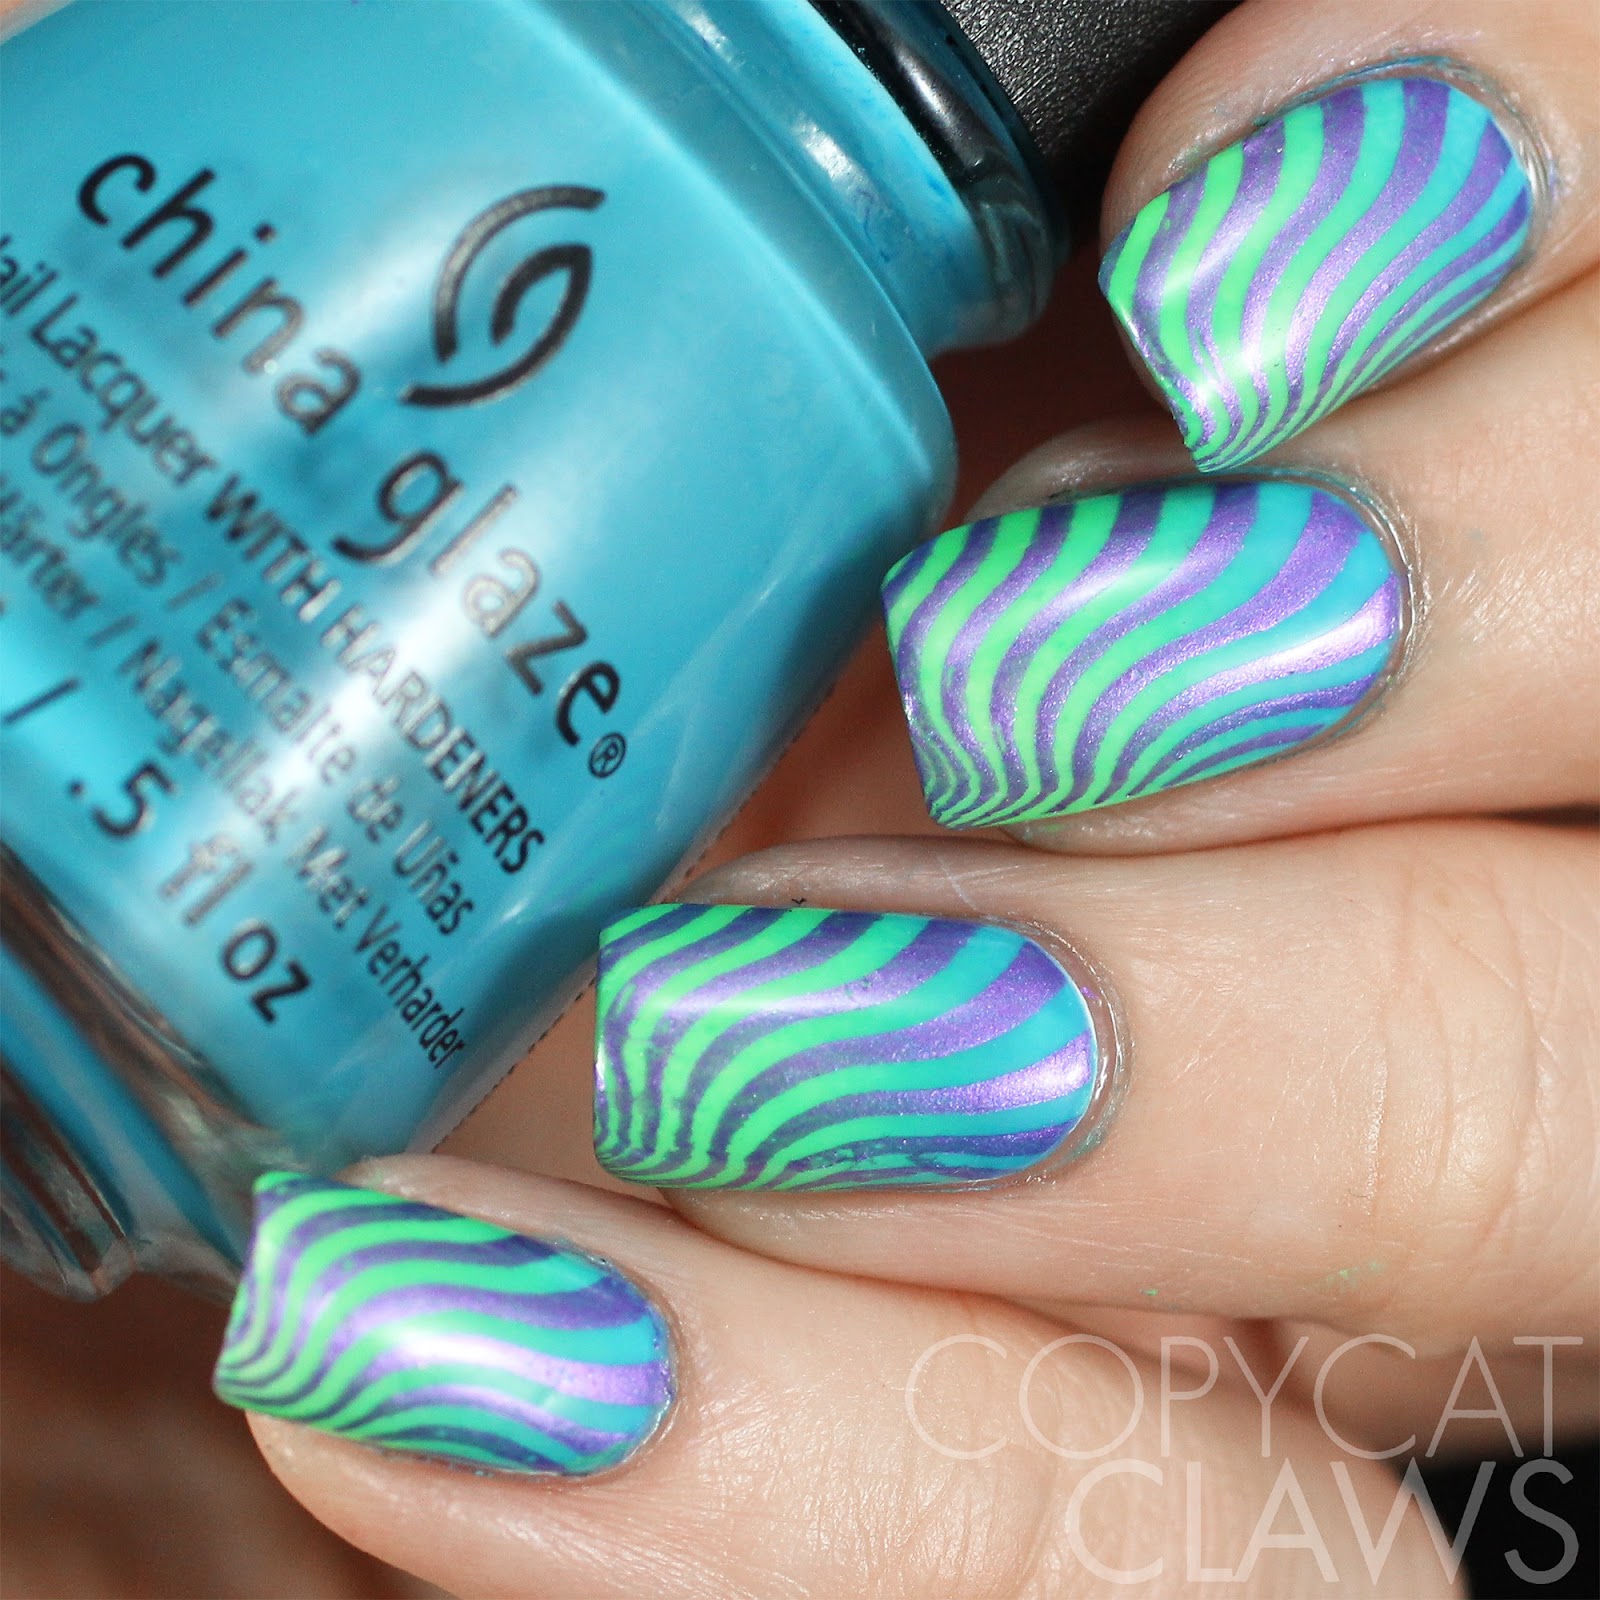 Copycat Claws: Esmaltes da Kelly Stamping Plate Review